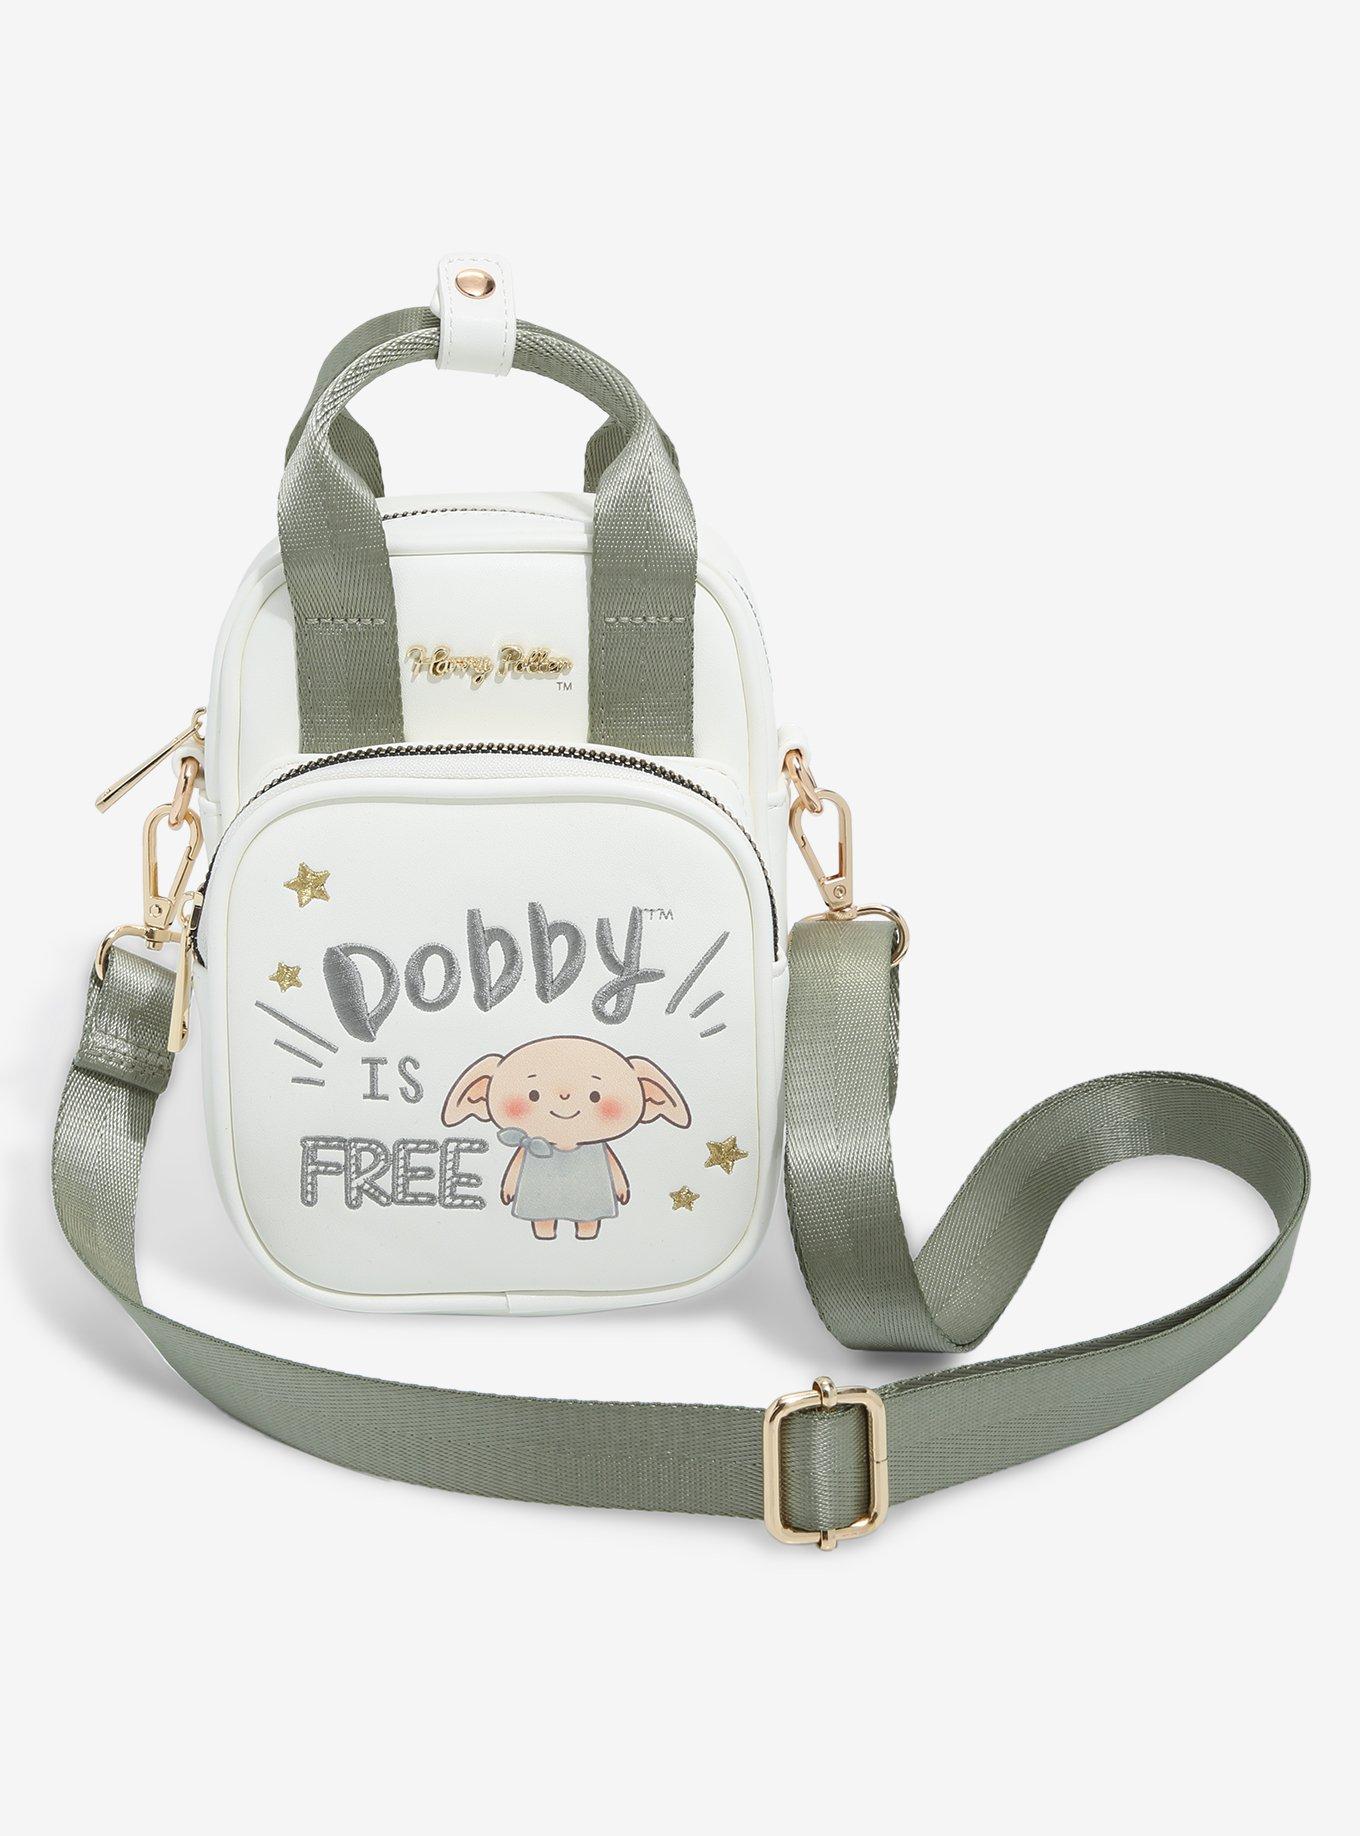 Harry Potter Chibi Dobby | Exclusive BoxLunch Bag BoxLunch is - Free Crossbody